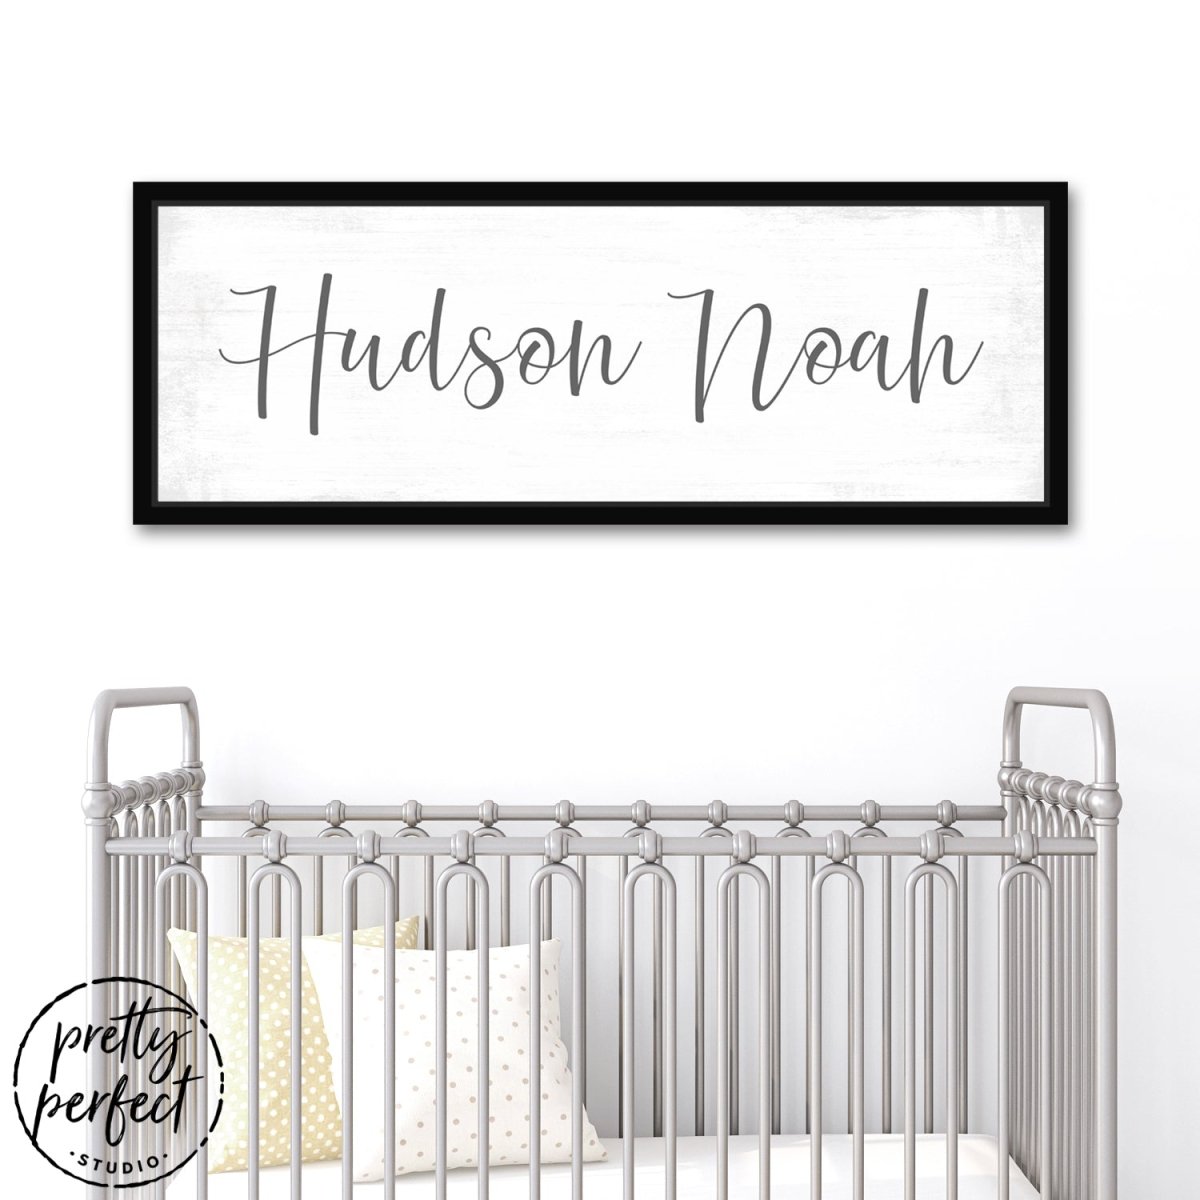 Baby Boy's Personalized Name Canvas Wall Art for the Nursery Room Above Crib - Pretty Perfect Studio